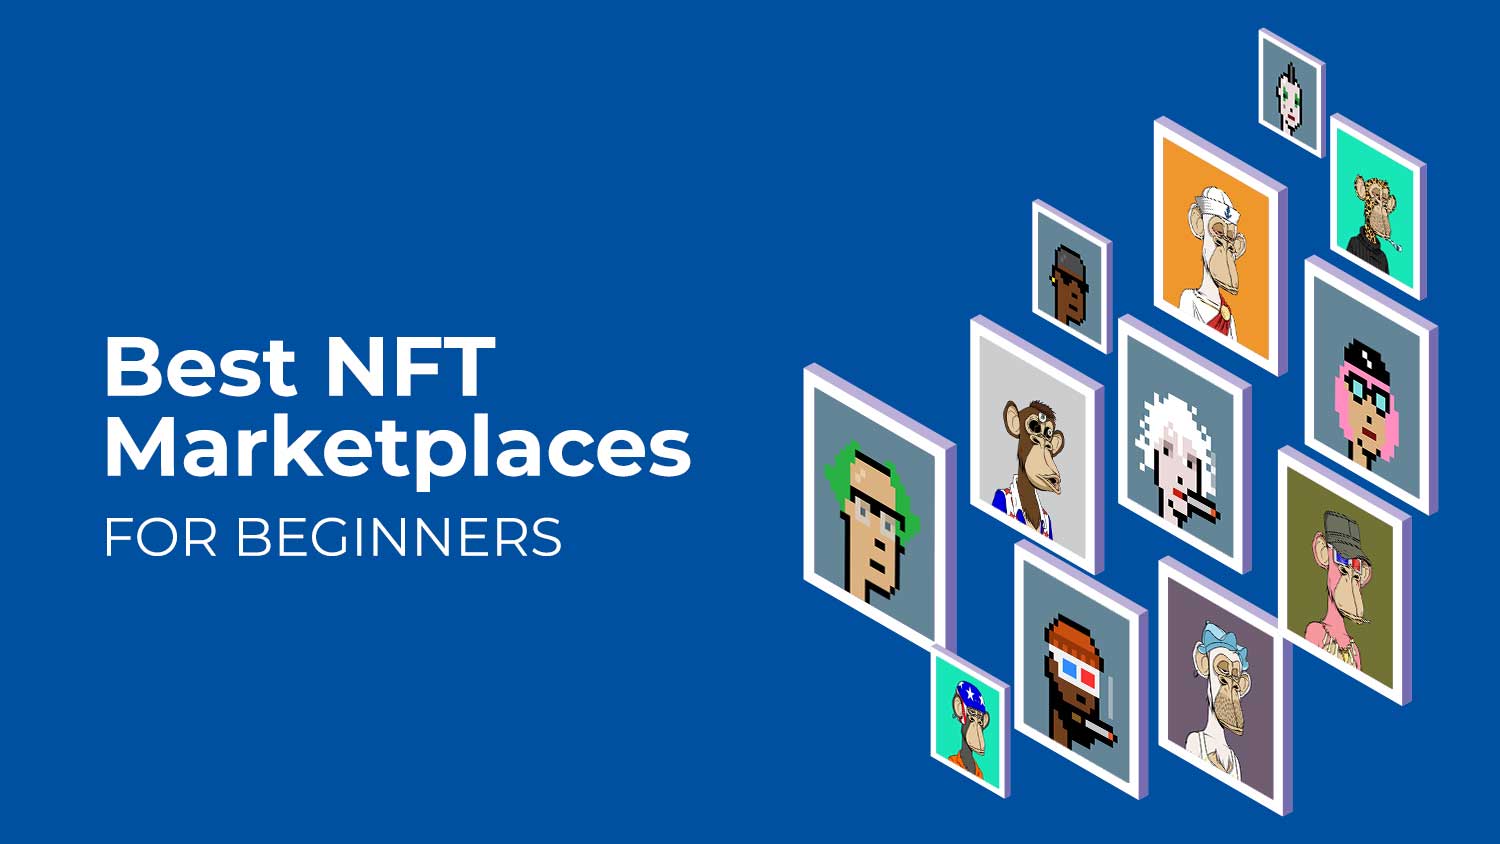 The 10 Best NFT marketplaces : Ultimate beginners guide 2022